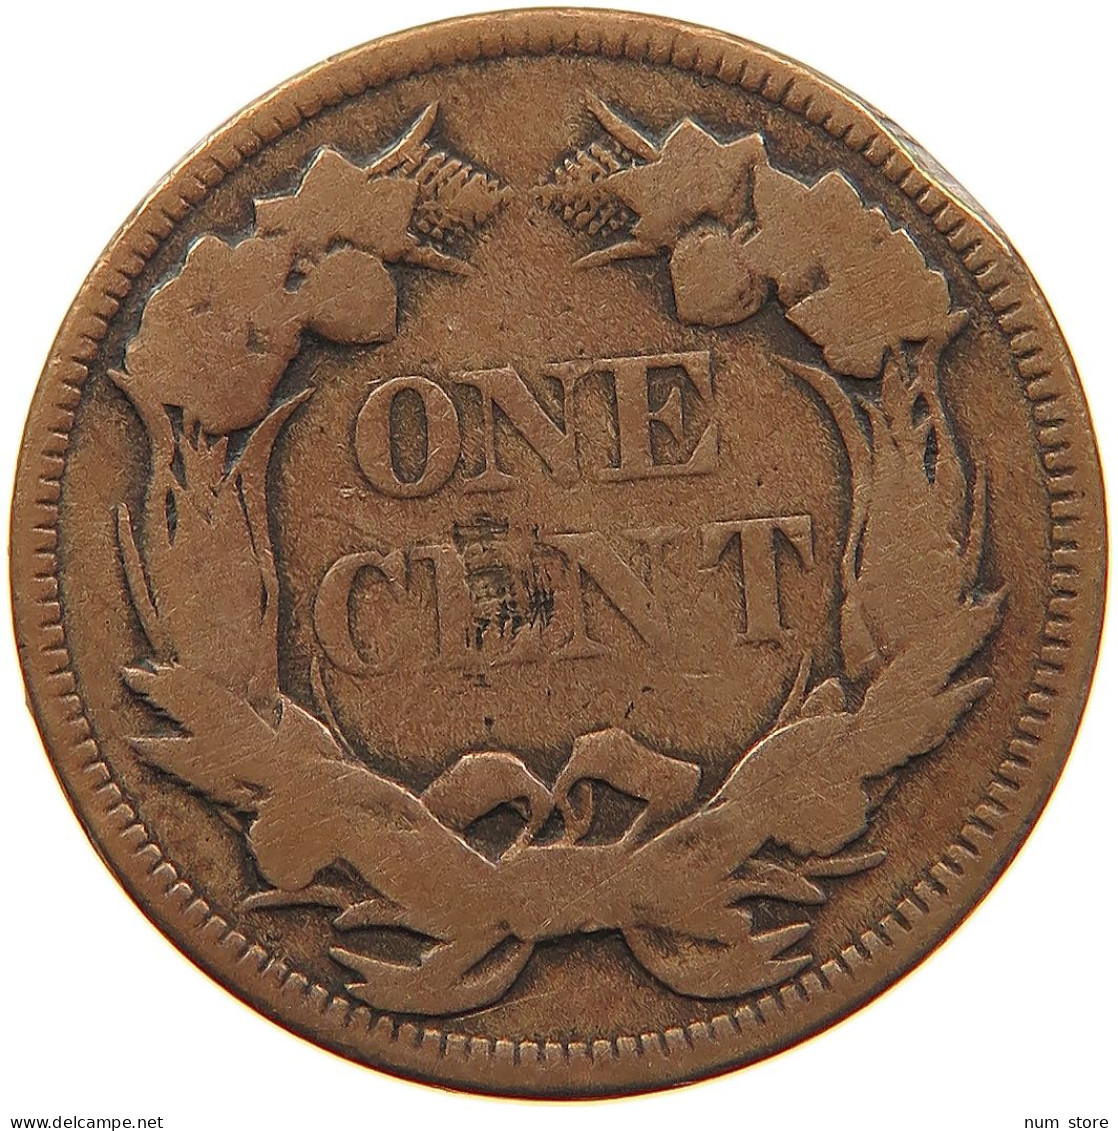 UNITED STATES OF AMERICA CENT 1857 FLYING EAGLE #t143 0423 - 1856-1858: Flying Eagle (Aigle Volant)